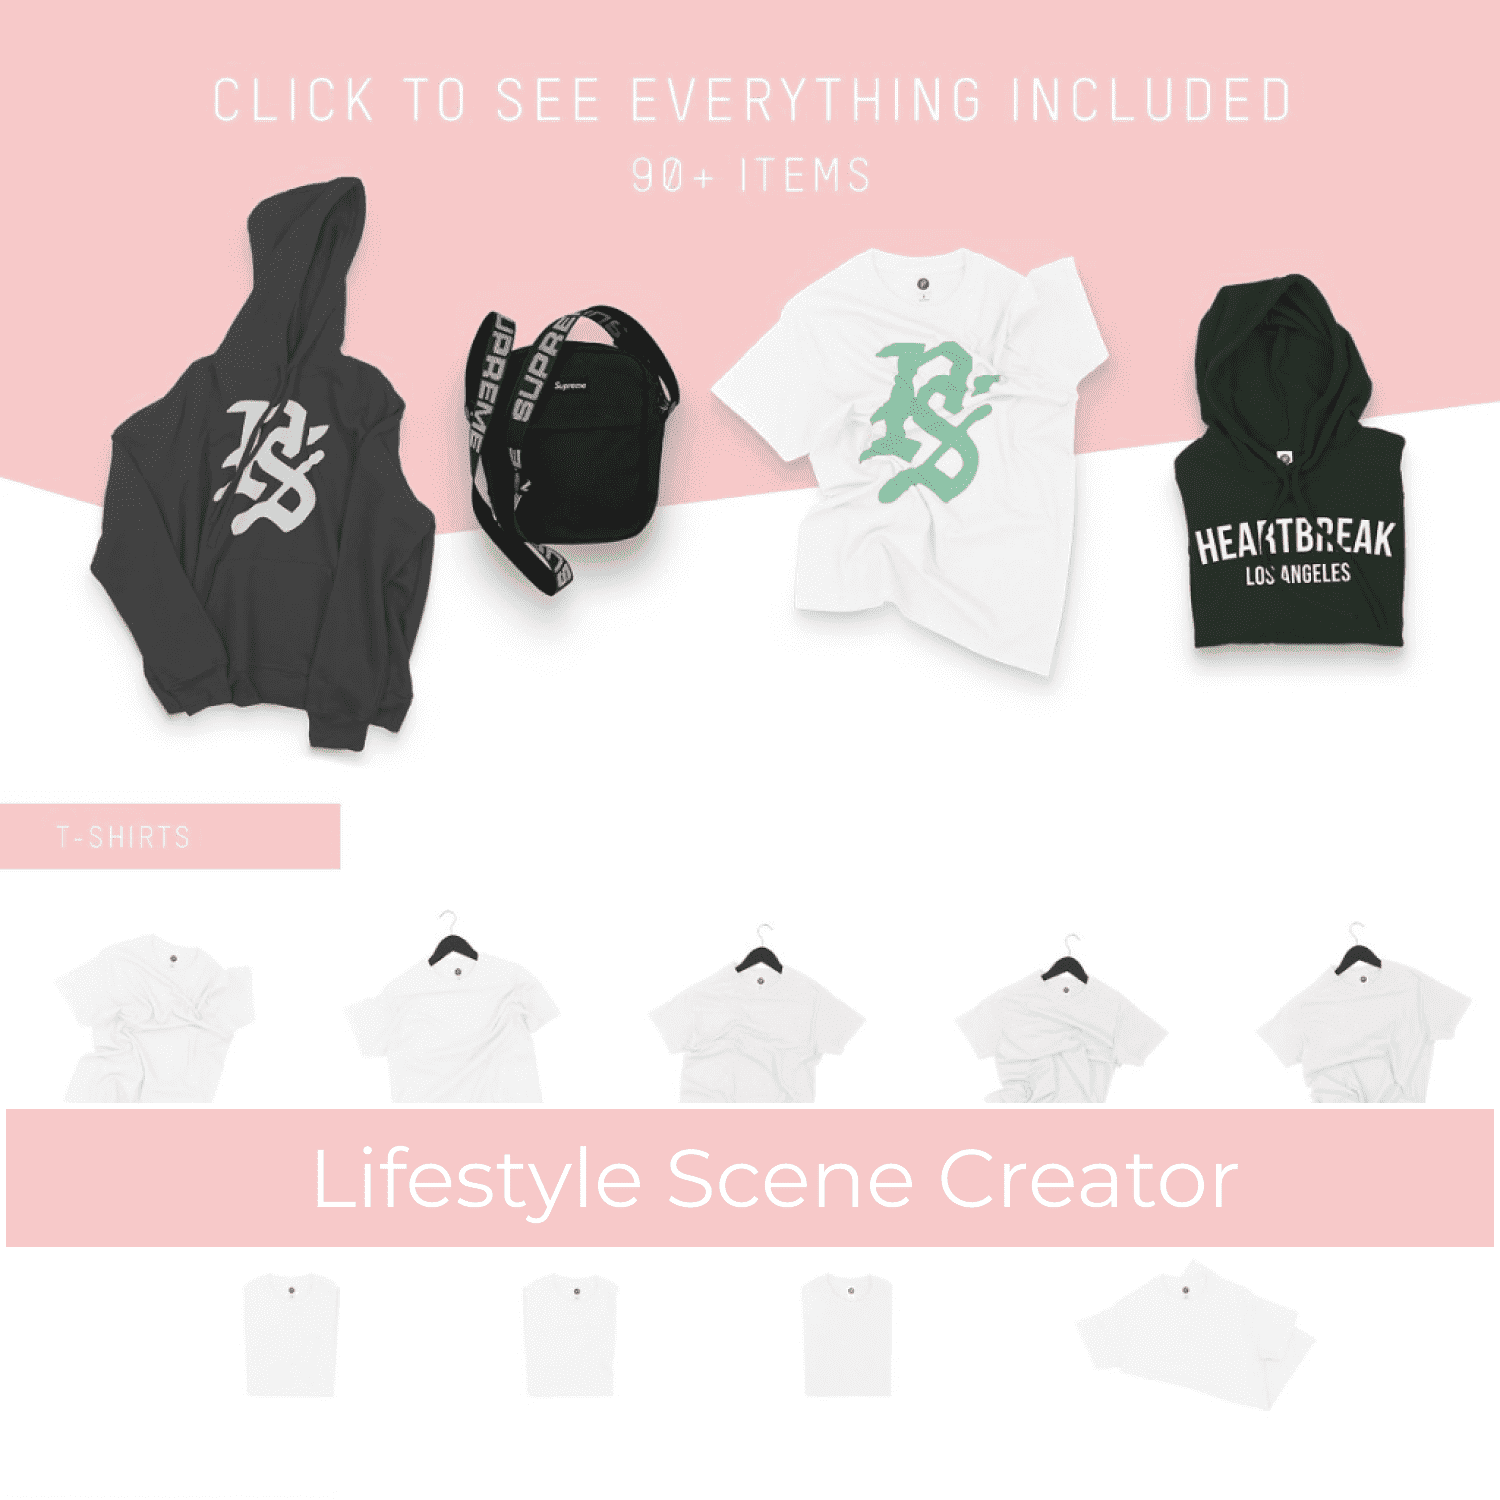 Lifestyle Scene Creator - Click To See Everything Included.